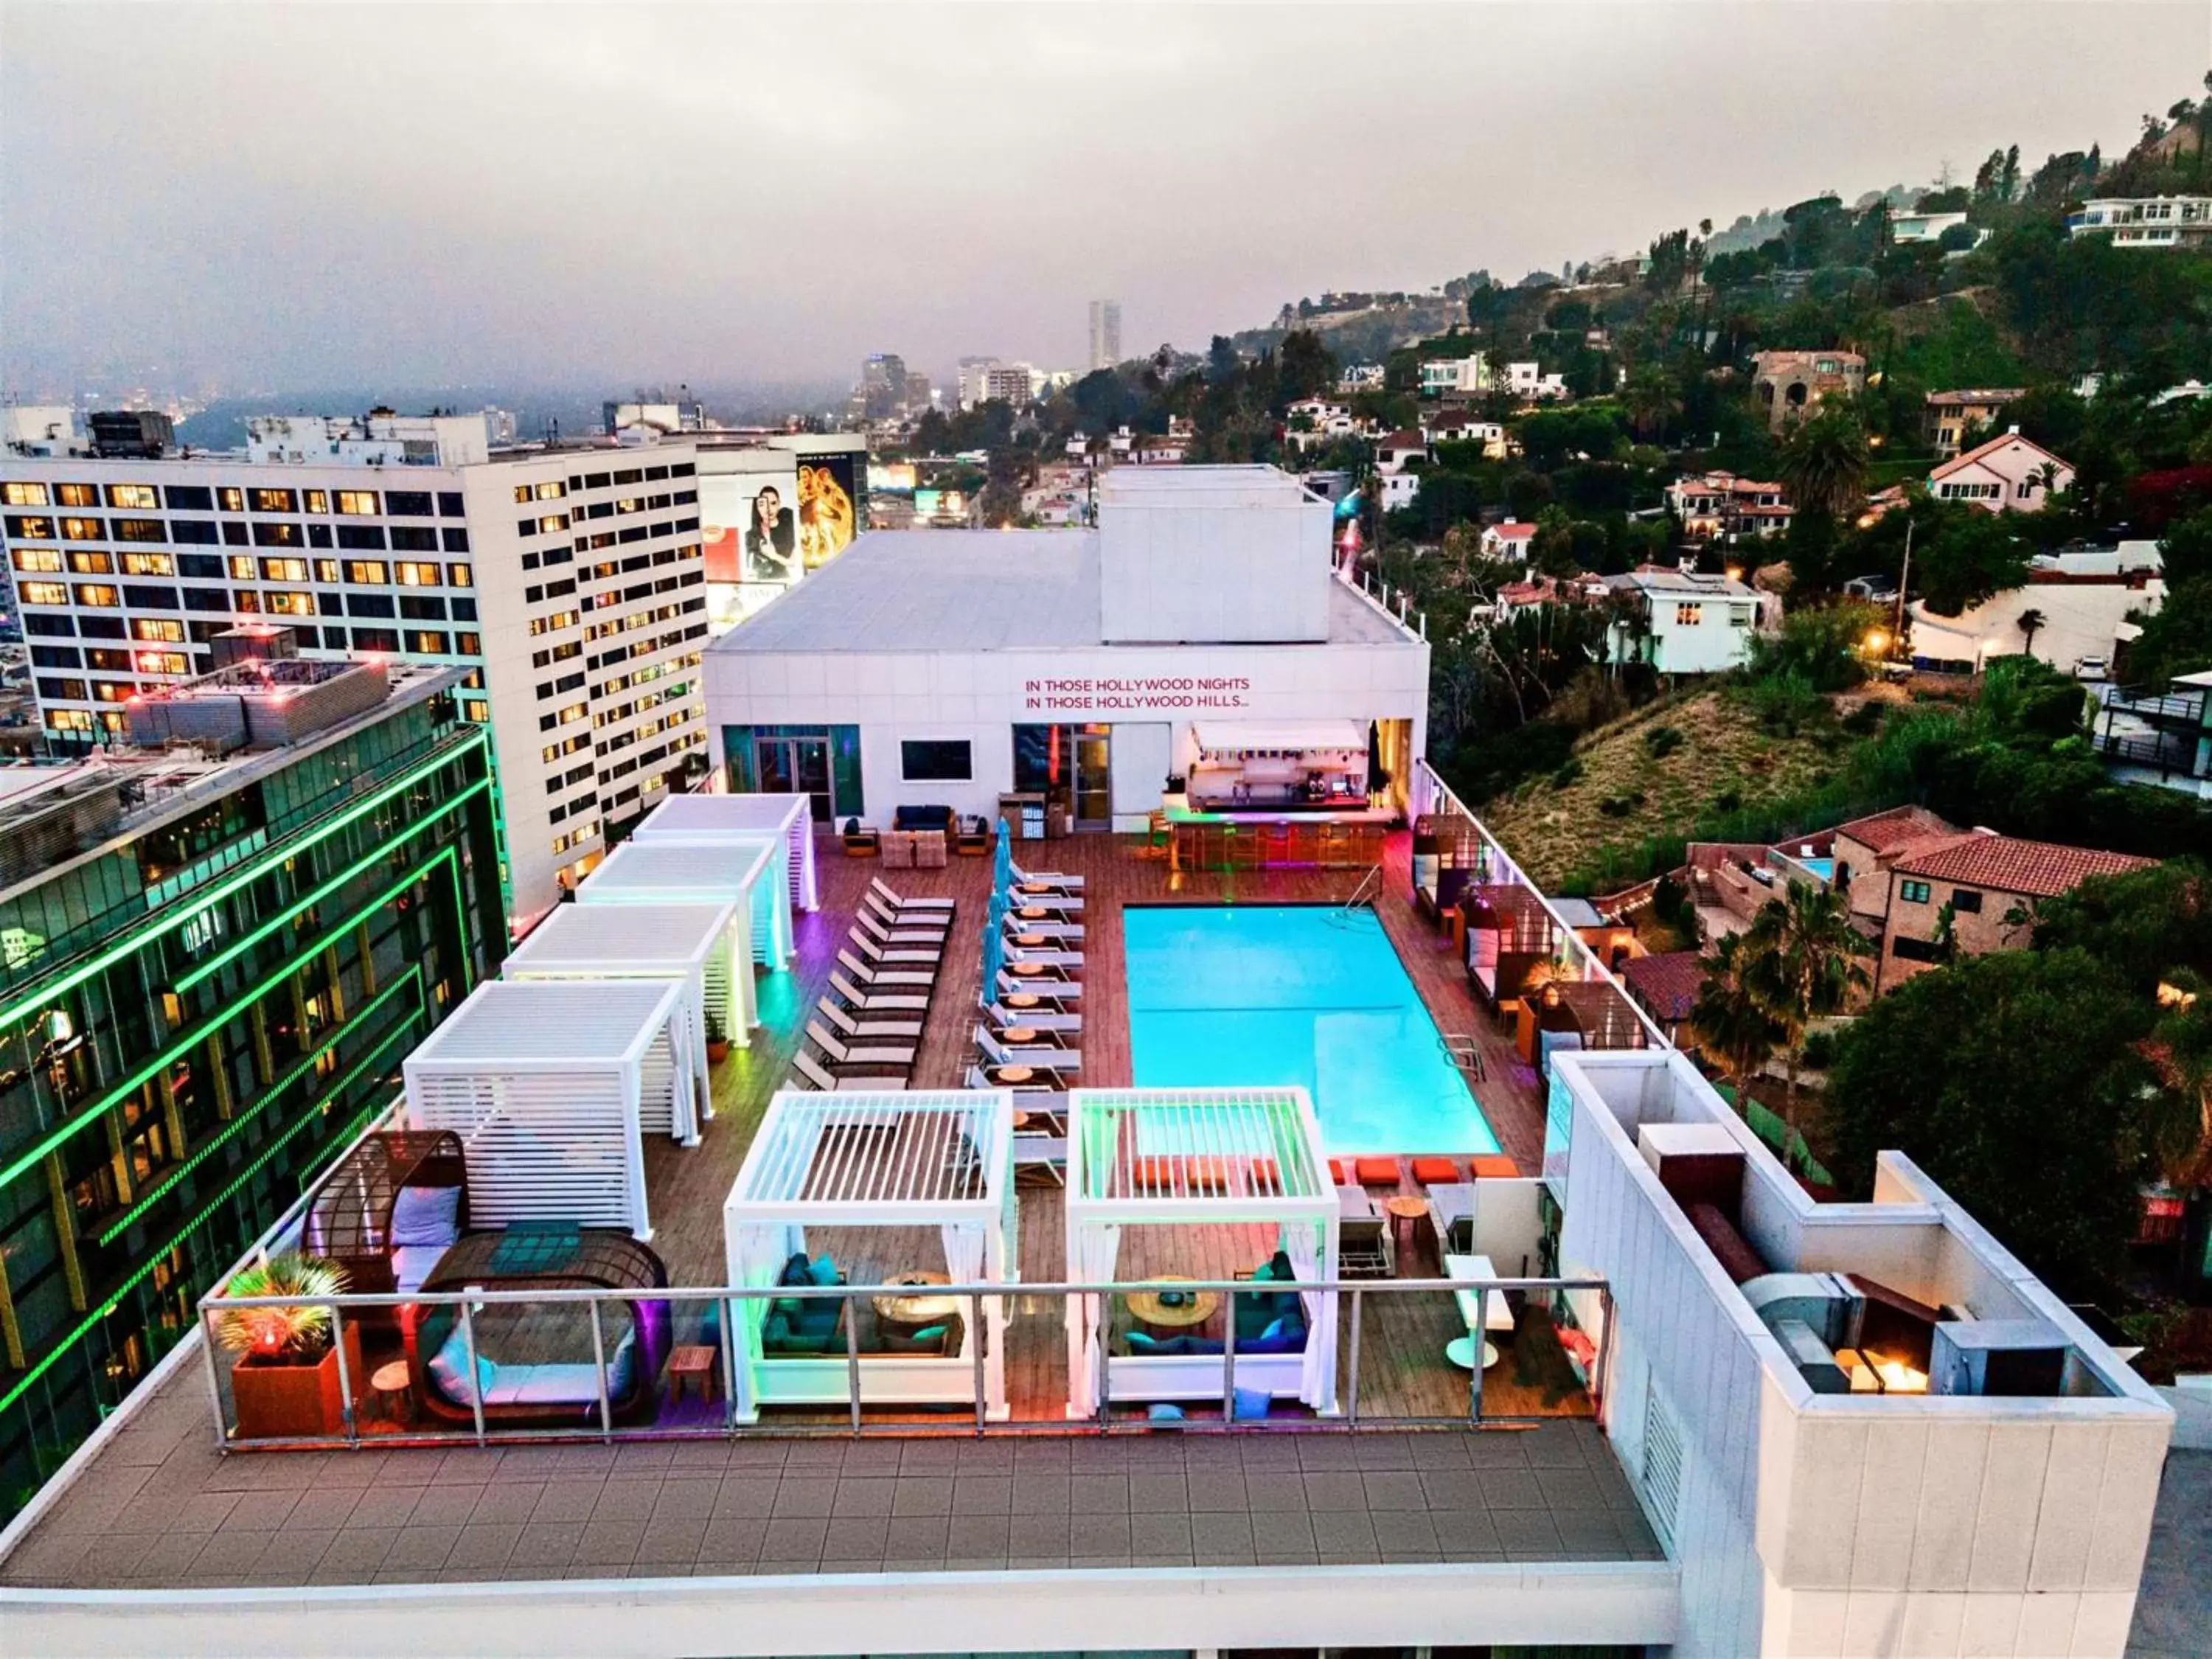 Property building, Pool View in Andaz West Hollywood-a concept by Hyatt